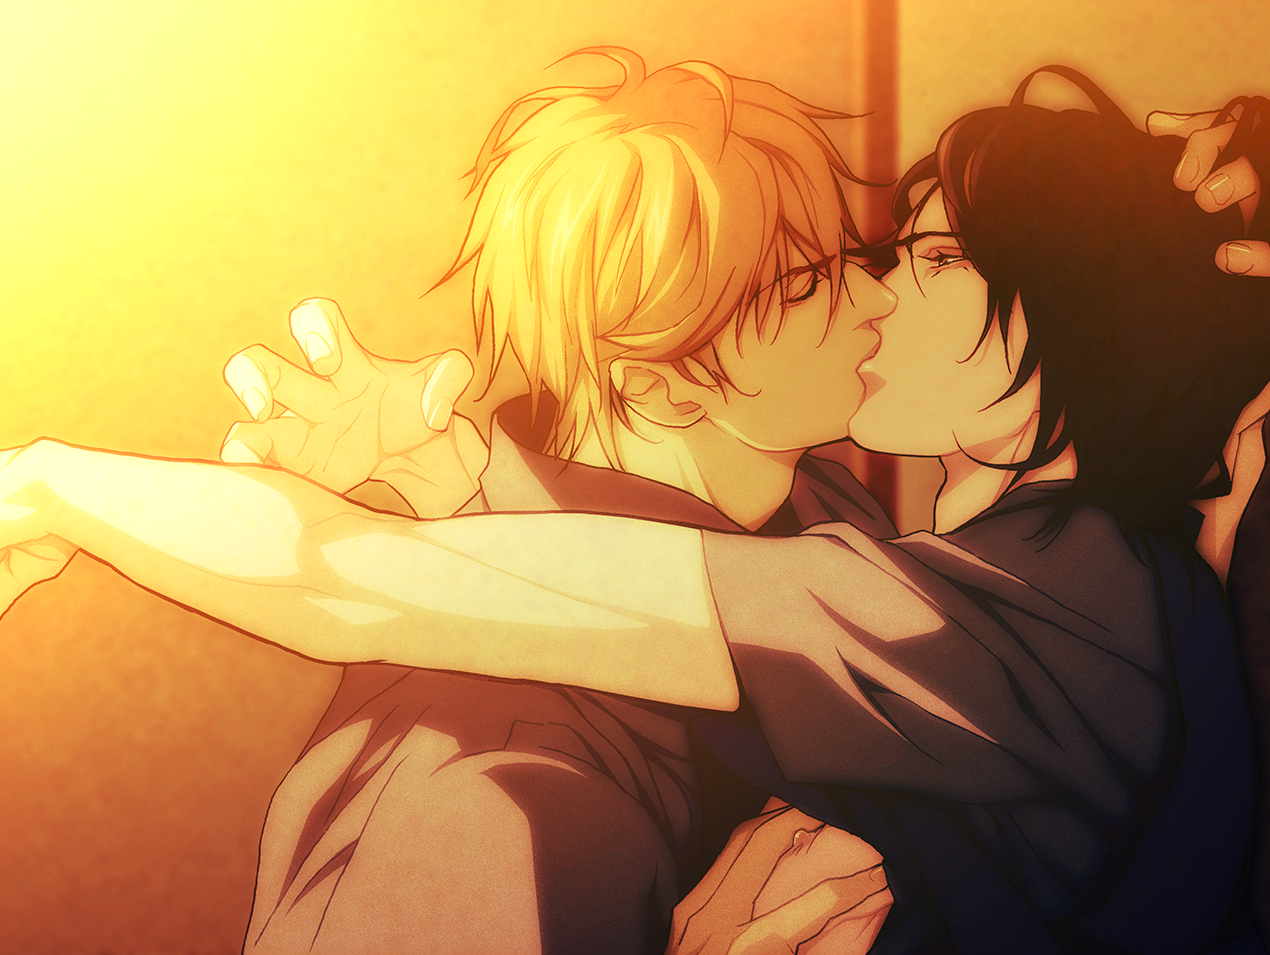 Tetsuo kisses Youji on the floor of his bedroom.